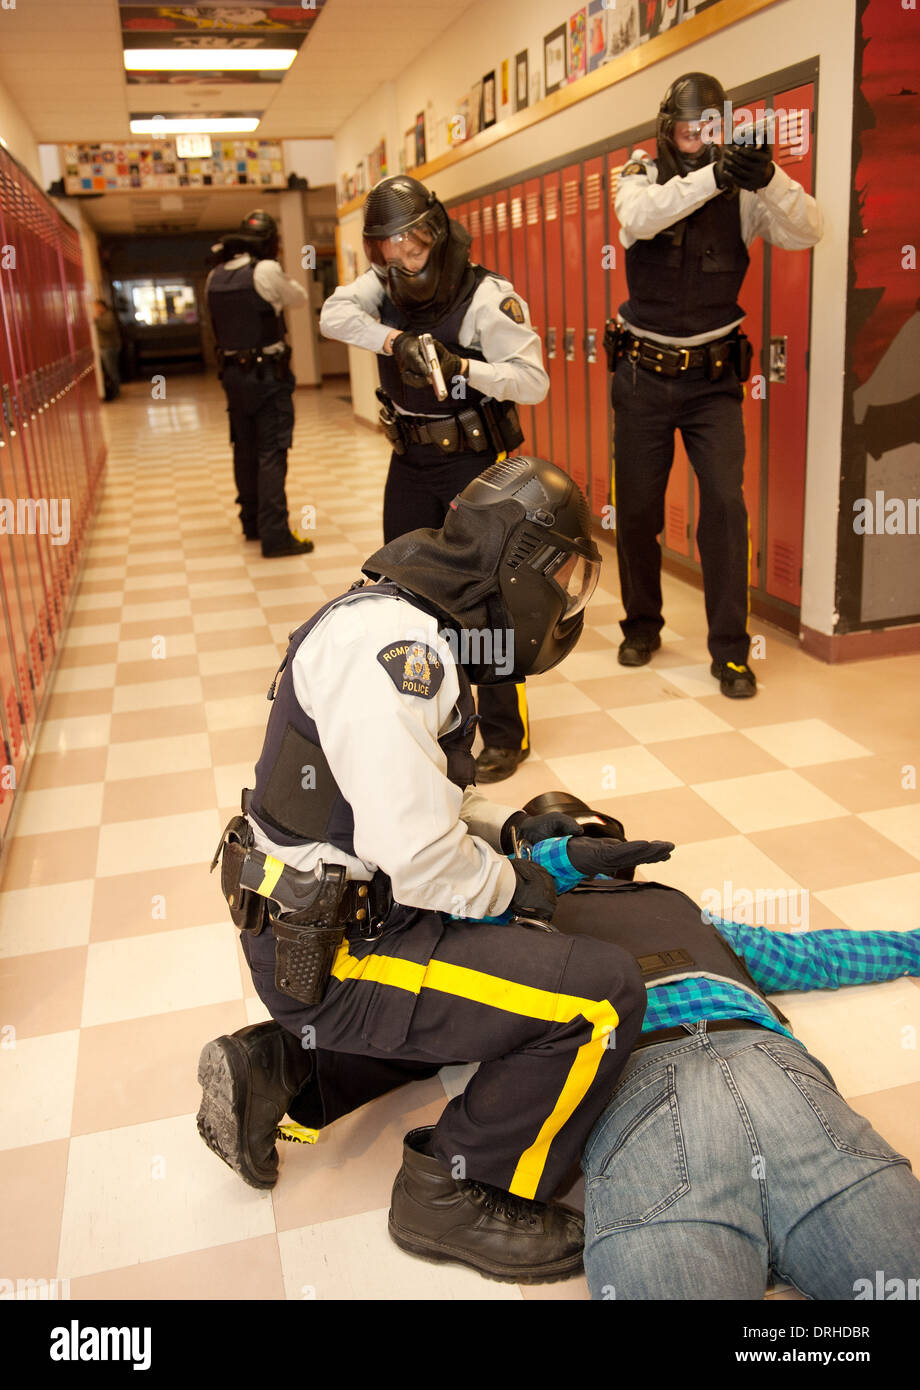 RCMP police officers take part in an active threat training exercise in SWAT, IRT and tactical response, at a high school. Stock Photo